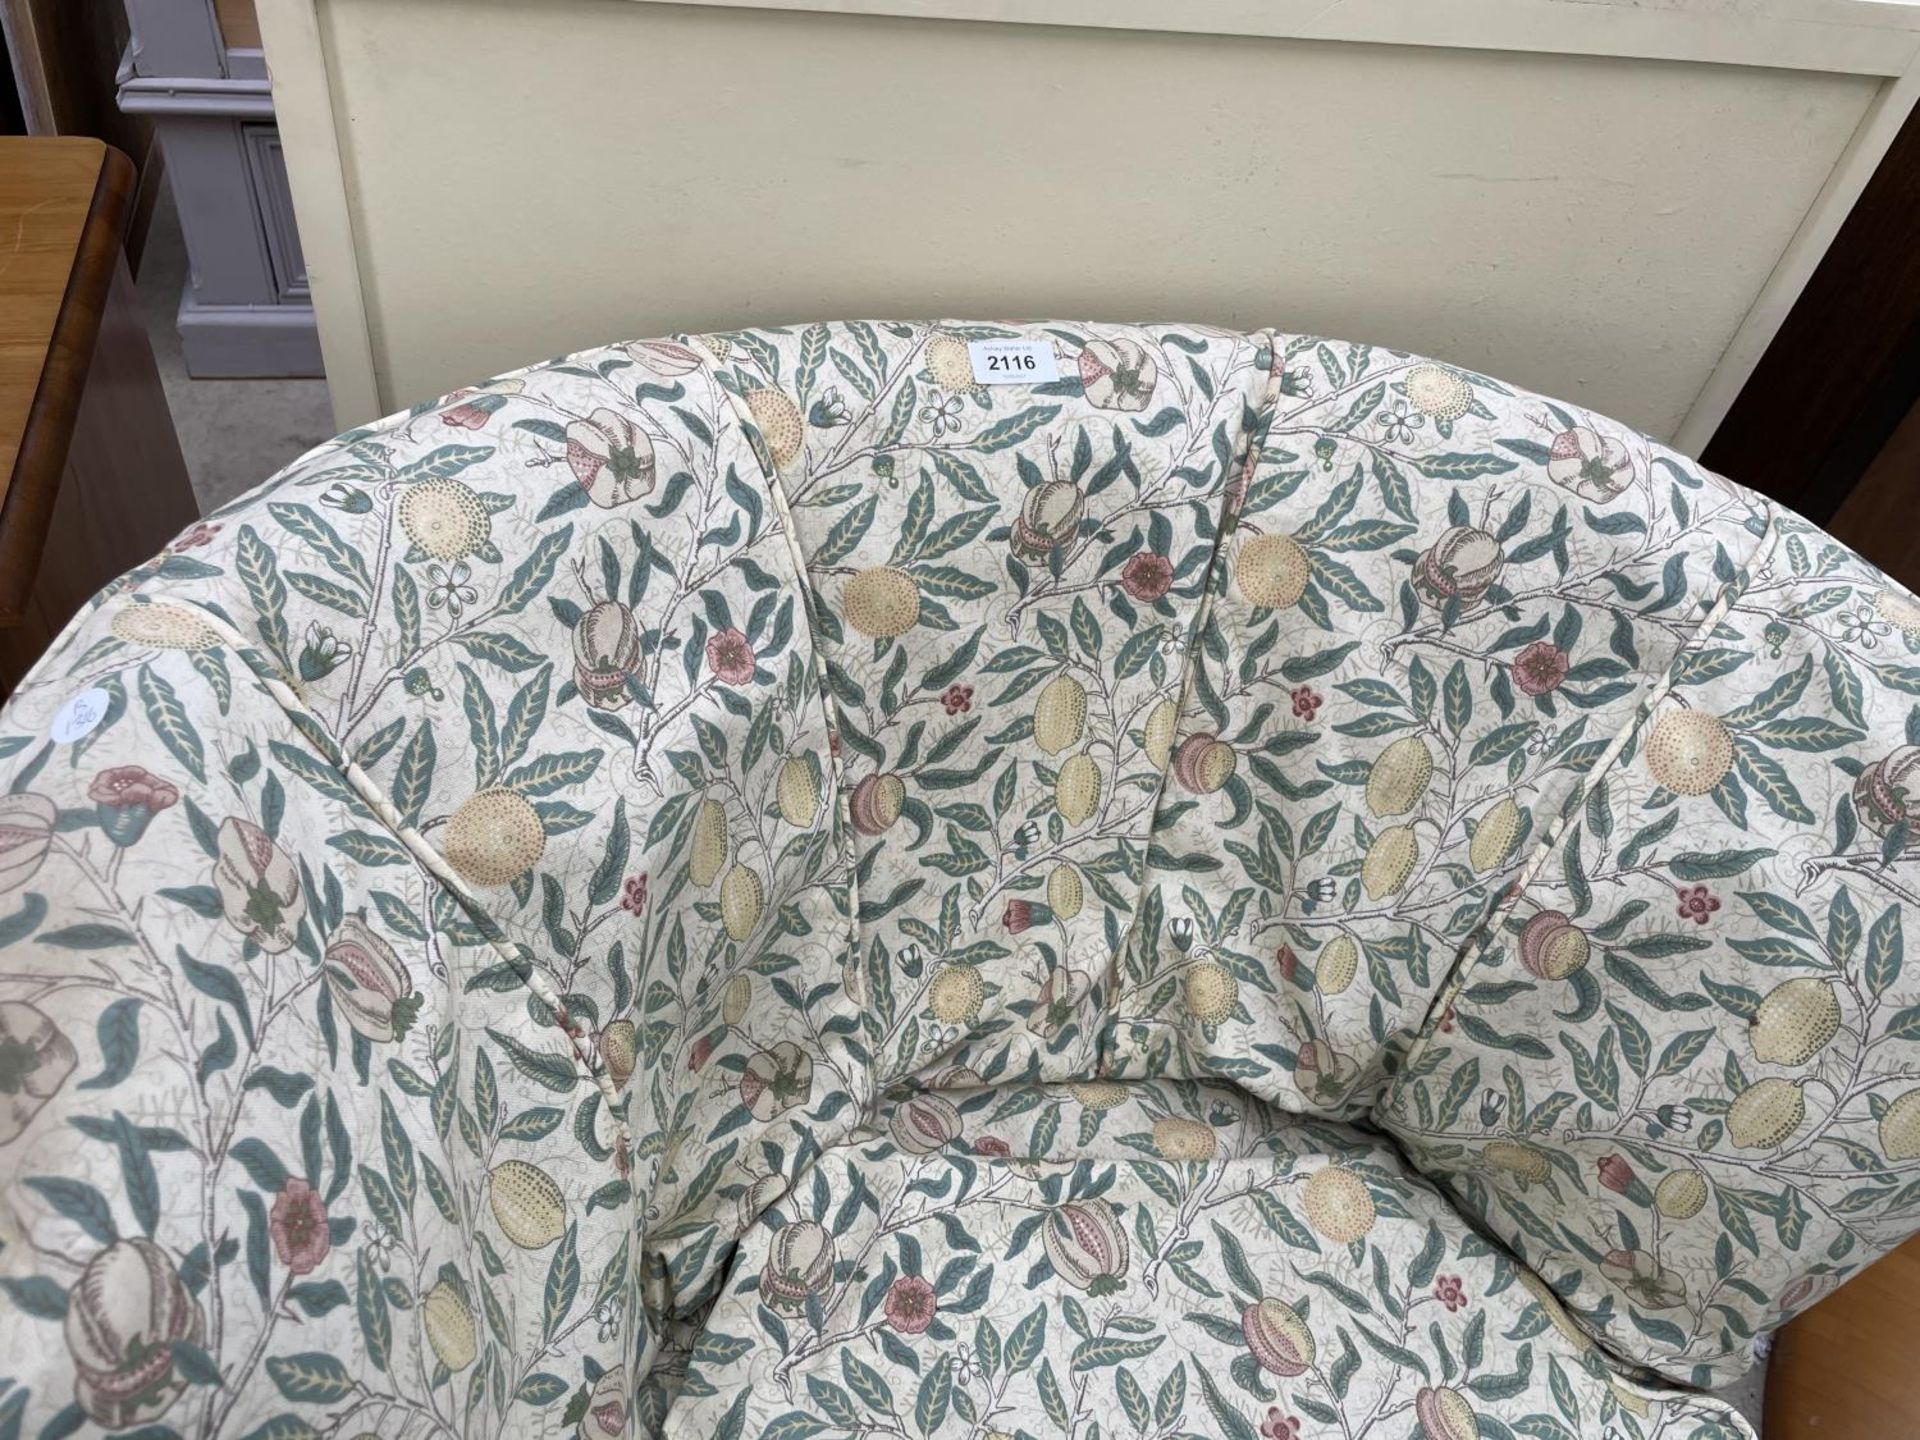 A MODERN BEDROOM CHAIR WITH FLORAL COVER - Image 2 of 3